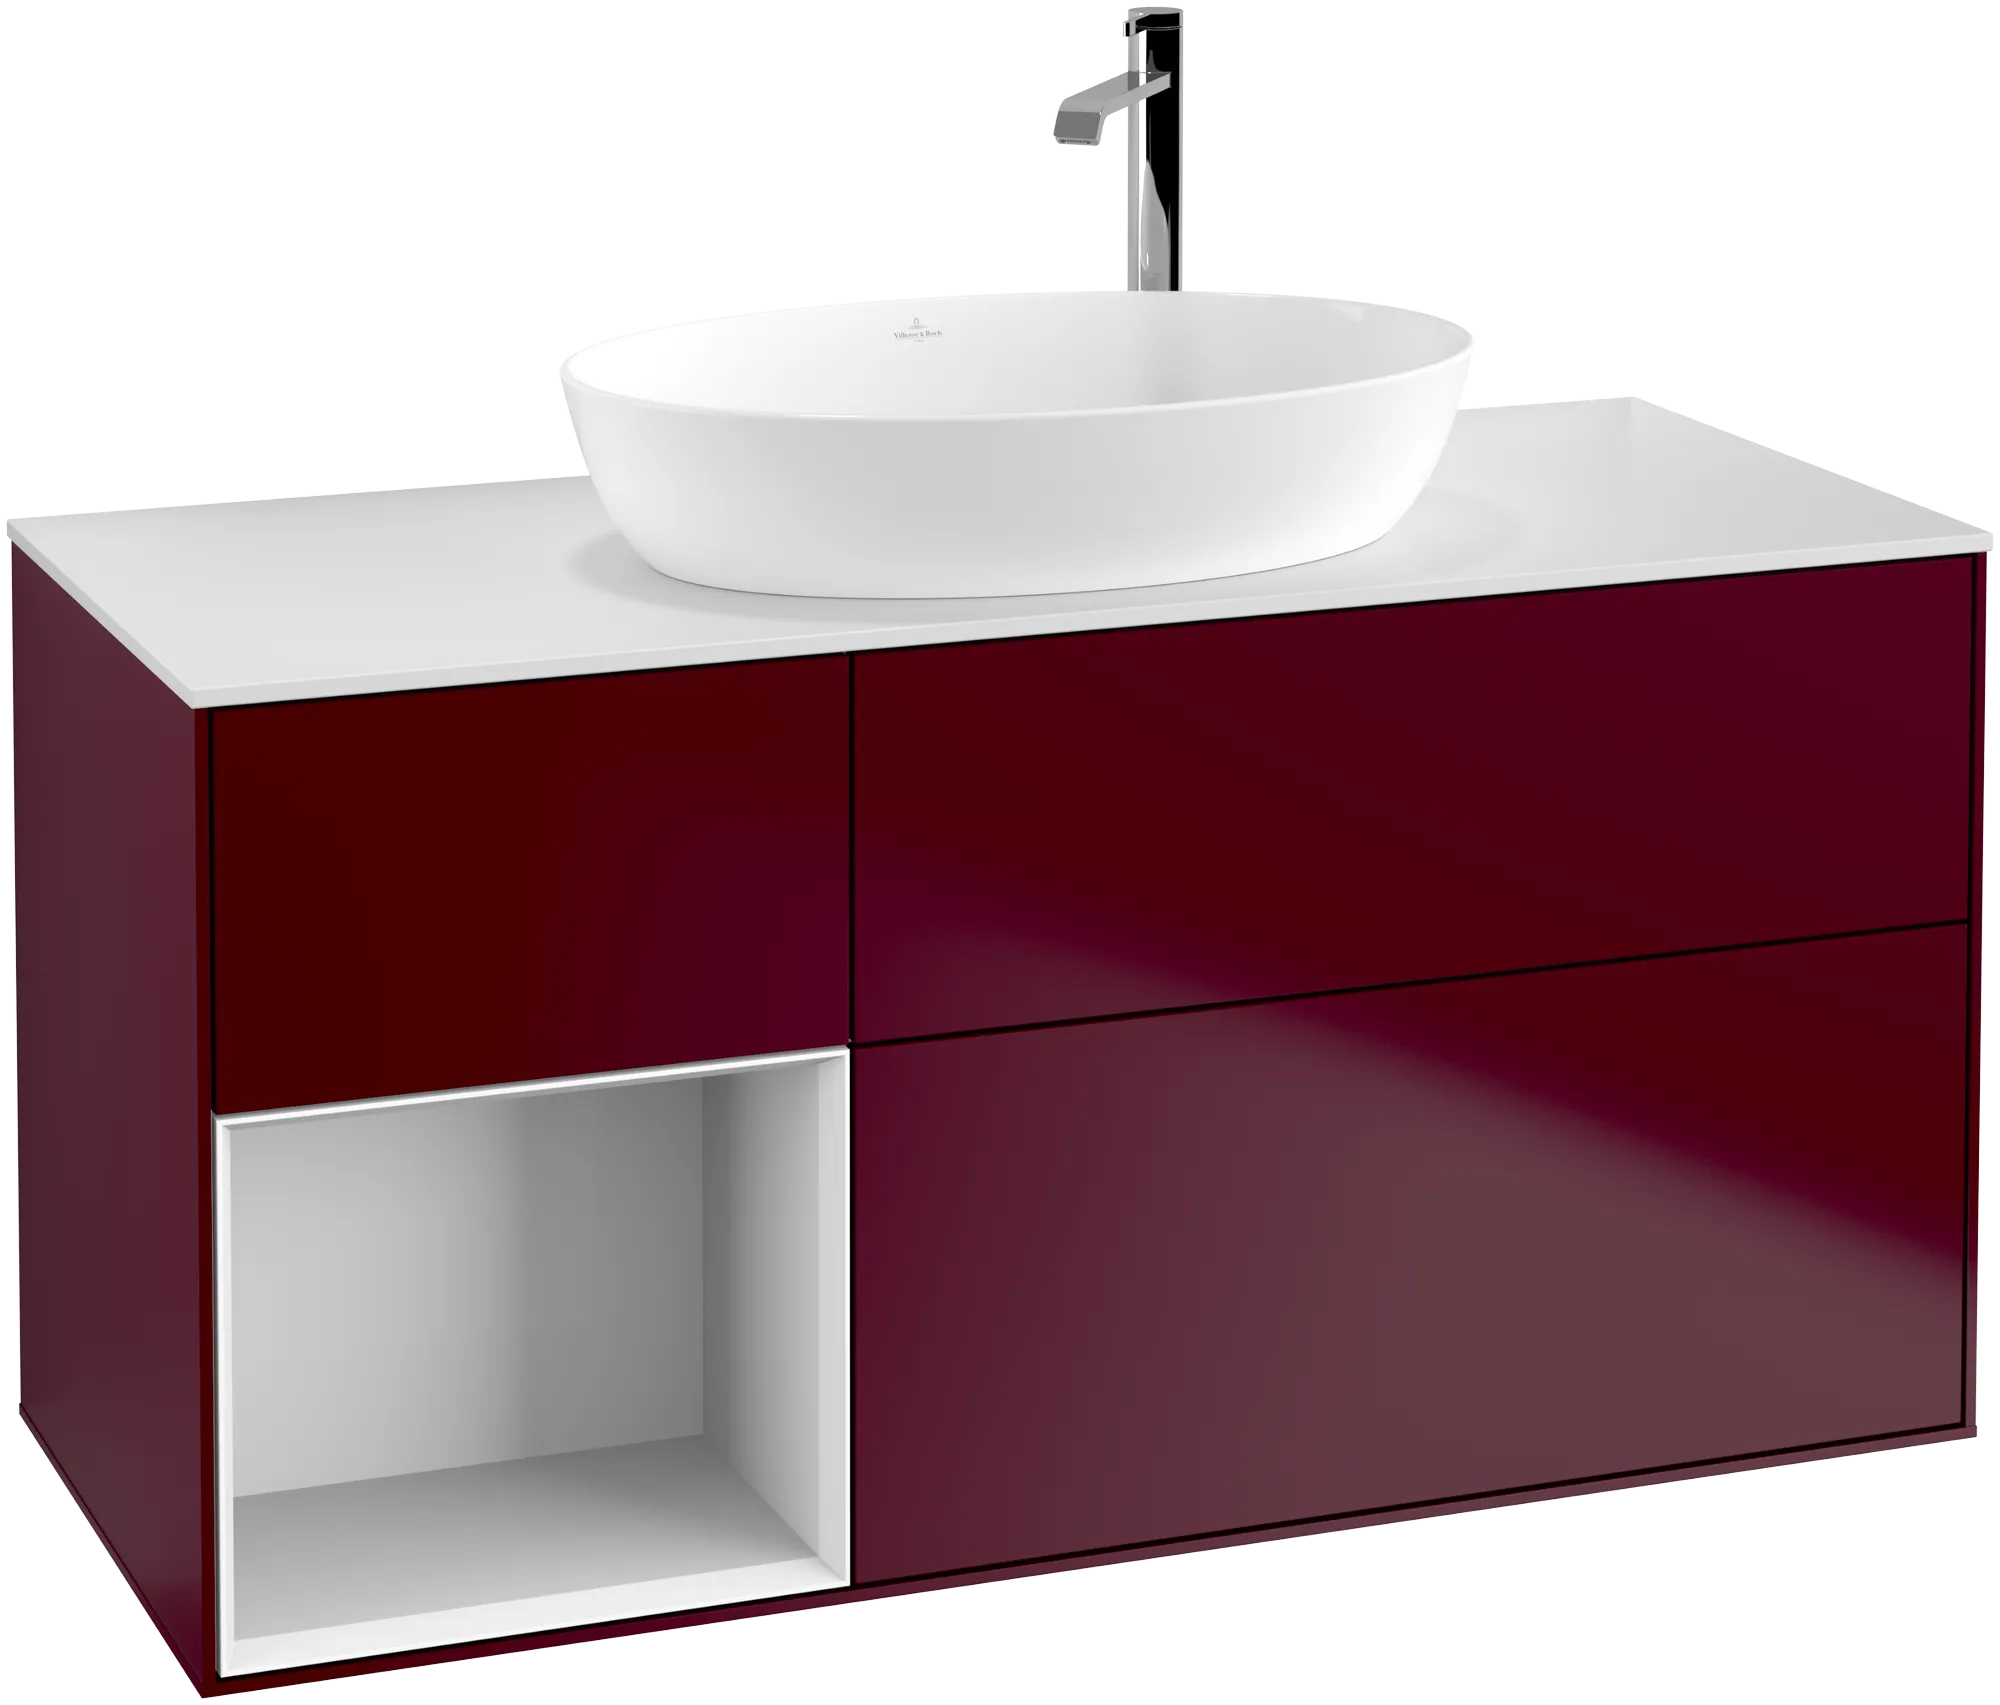 VILLEROY BOCH Finion Vanity unit, with lighting, 3 pull-out compartments, 1200 x 603 x 501 mm, Peony Matt Lacquer / Glossy White Lacquer / Glass White Matt #G941GFHB resmi